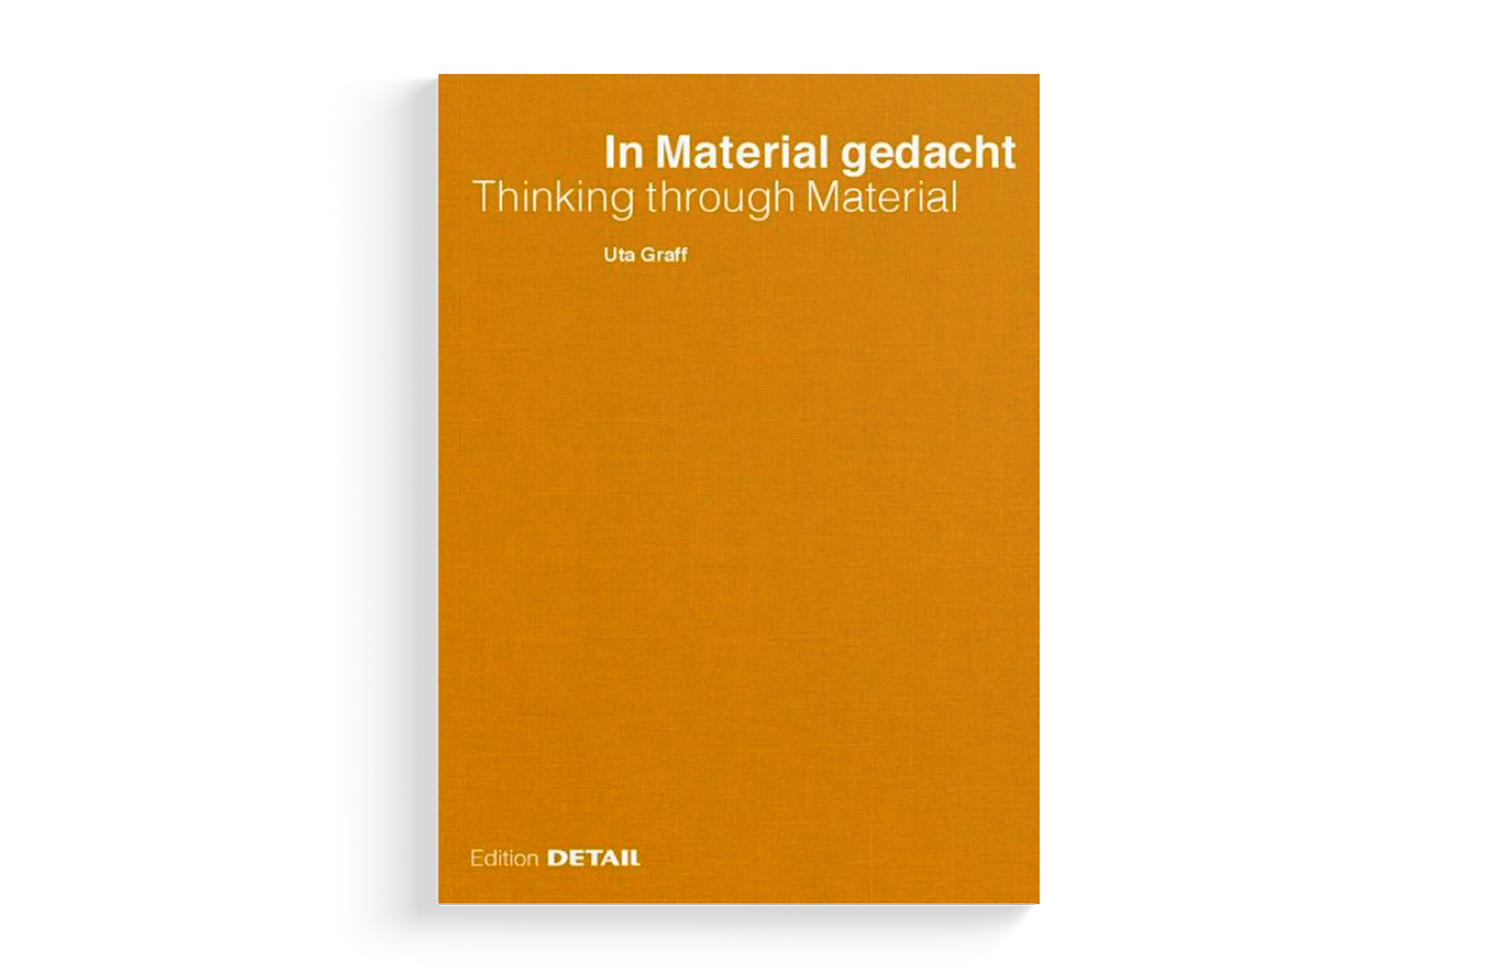 In Material gedacht